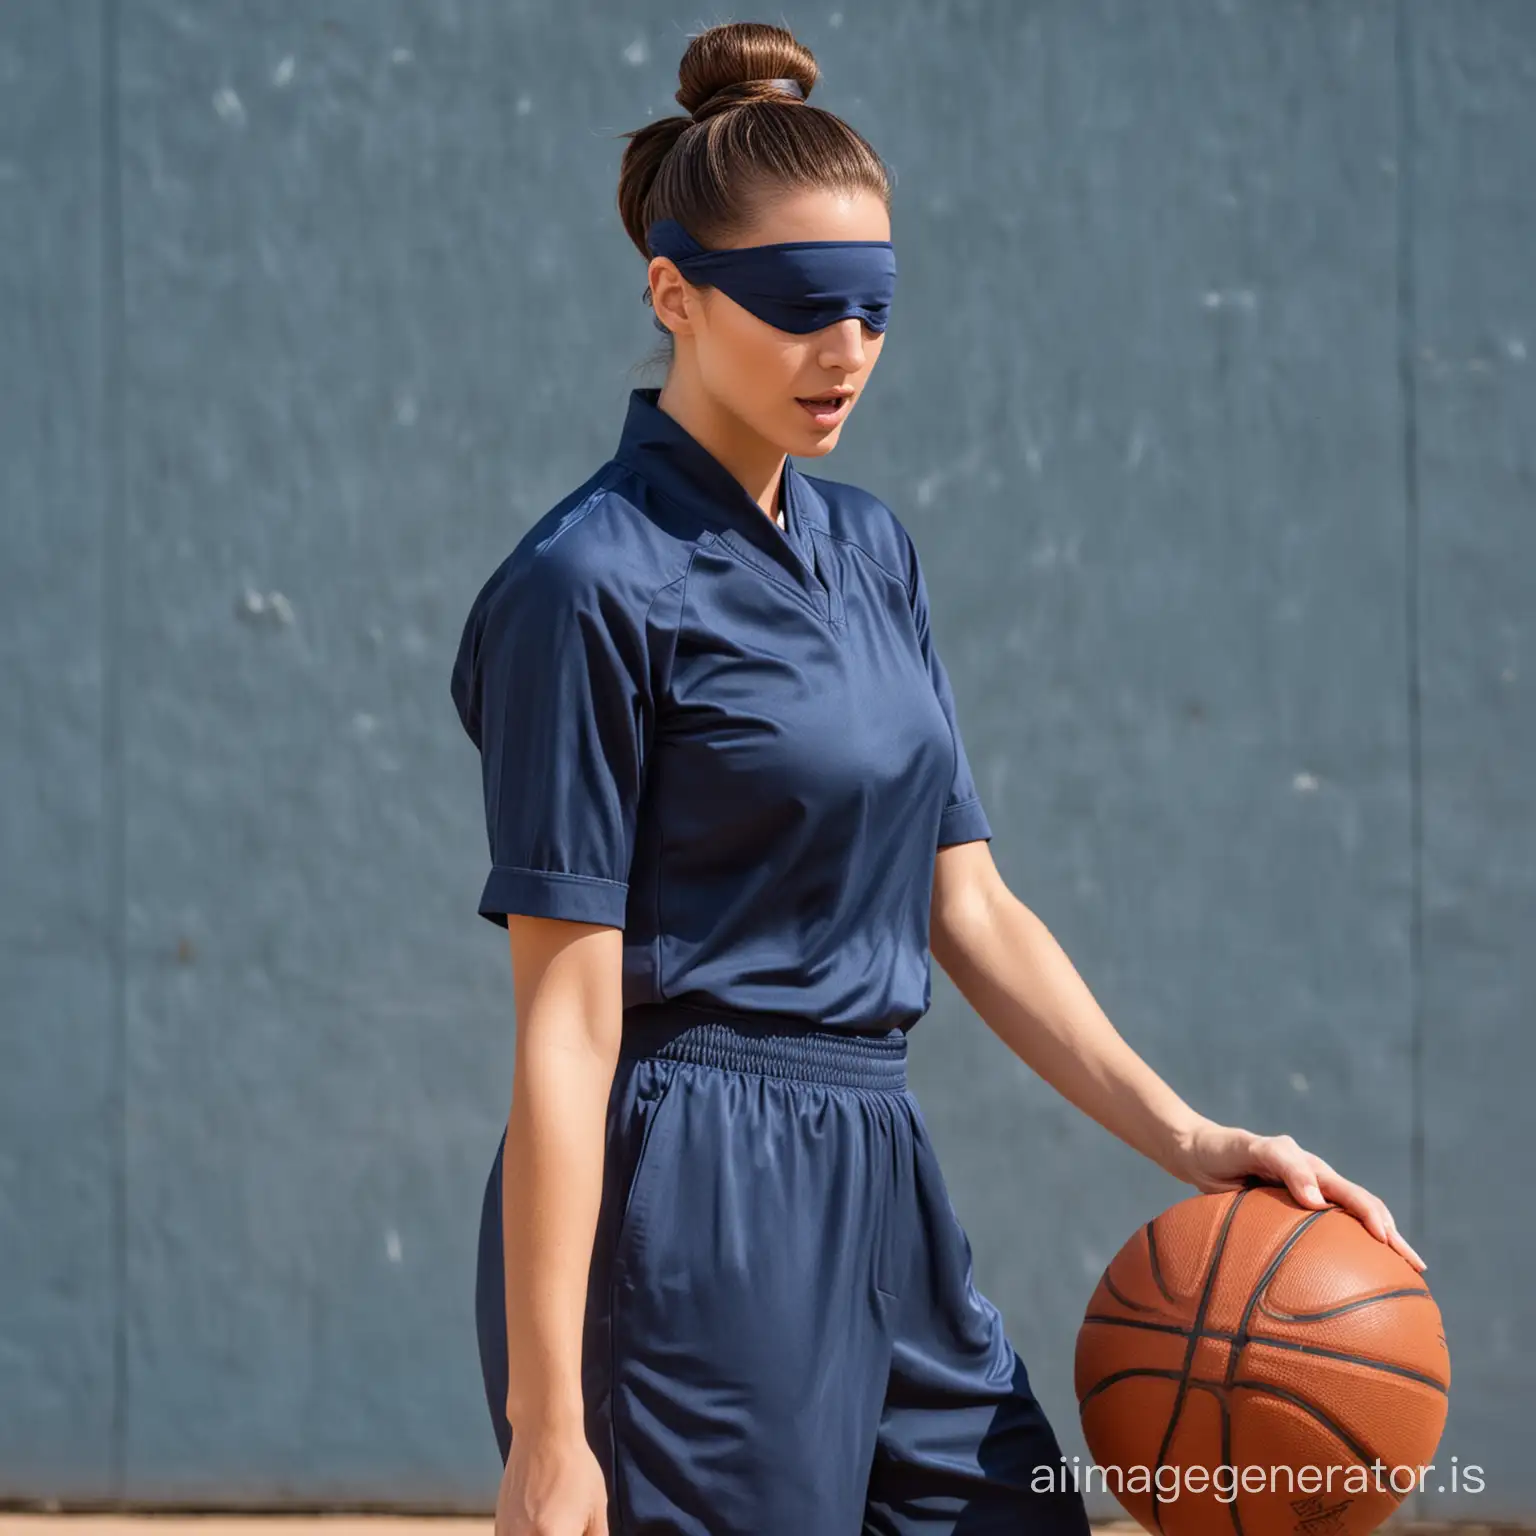 Dynamic-Blindfolded-Basketball-Game-with-a-Stylish-Brunette-in-Corporate-Wear